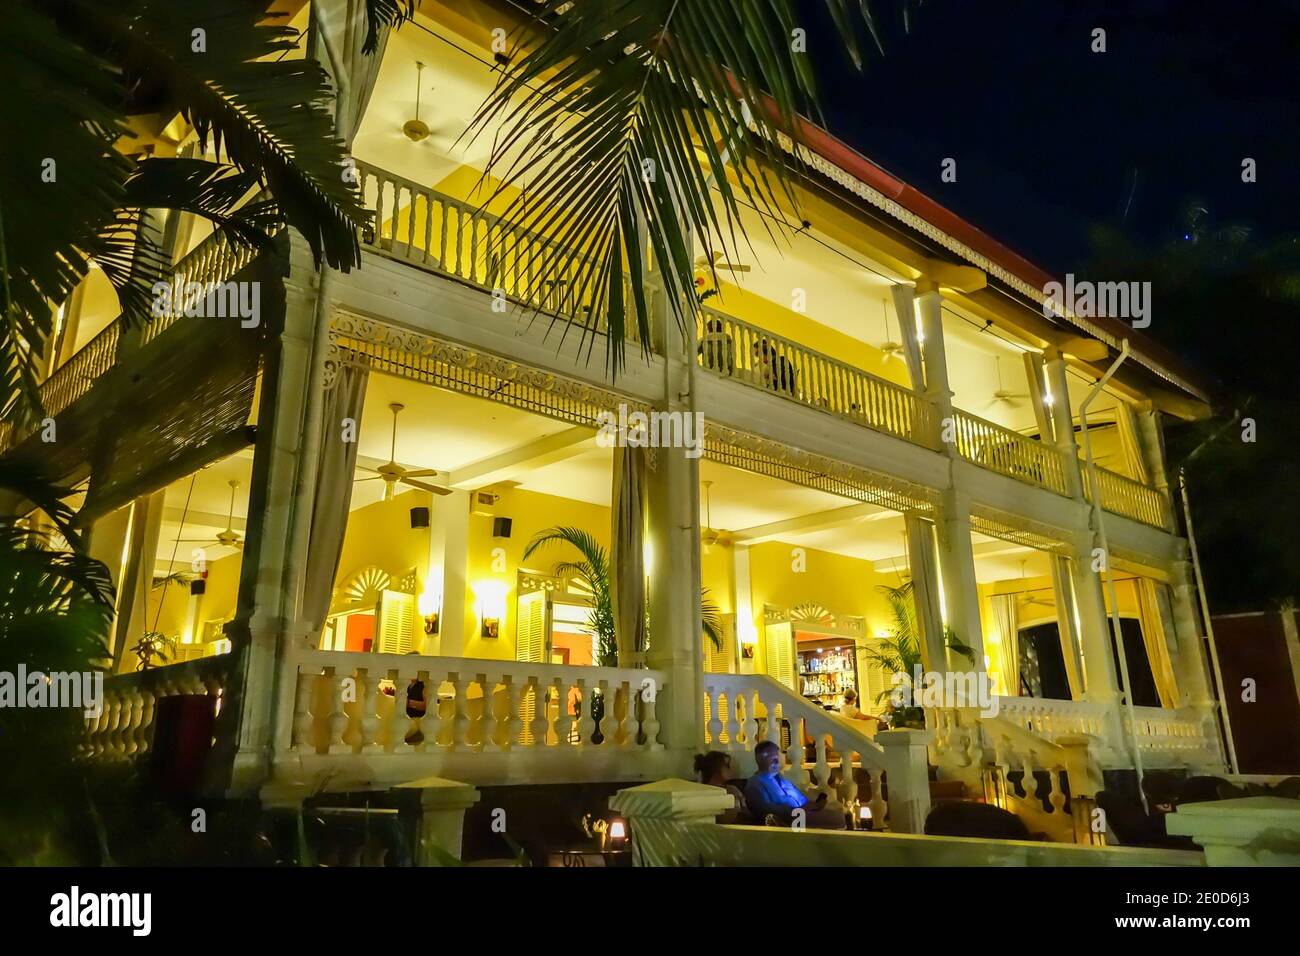 A view of the grounds at night time of the luxury hotel La Veranda Resort, Phu Quoc, Vietnam, Asia Stock Photo